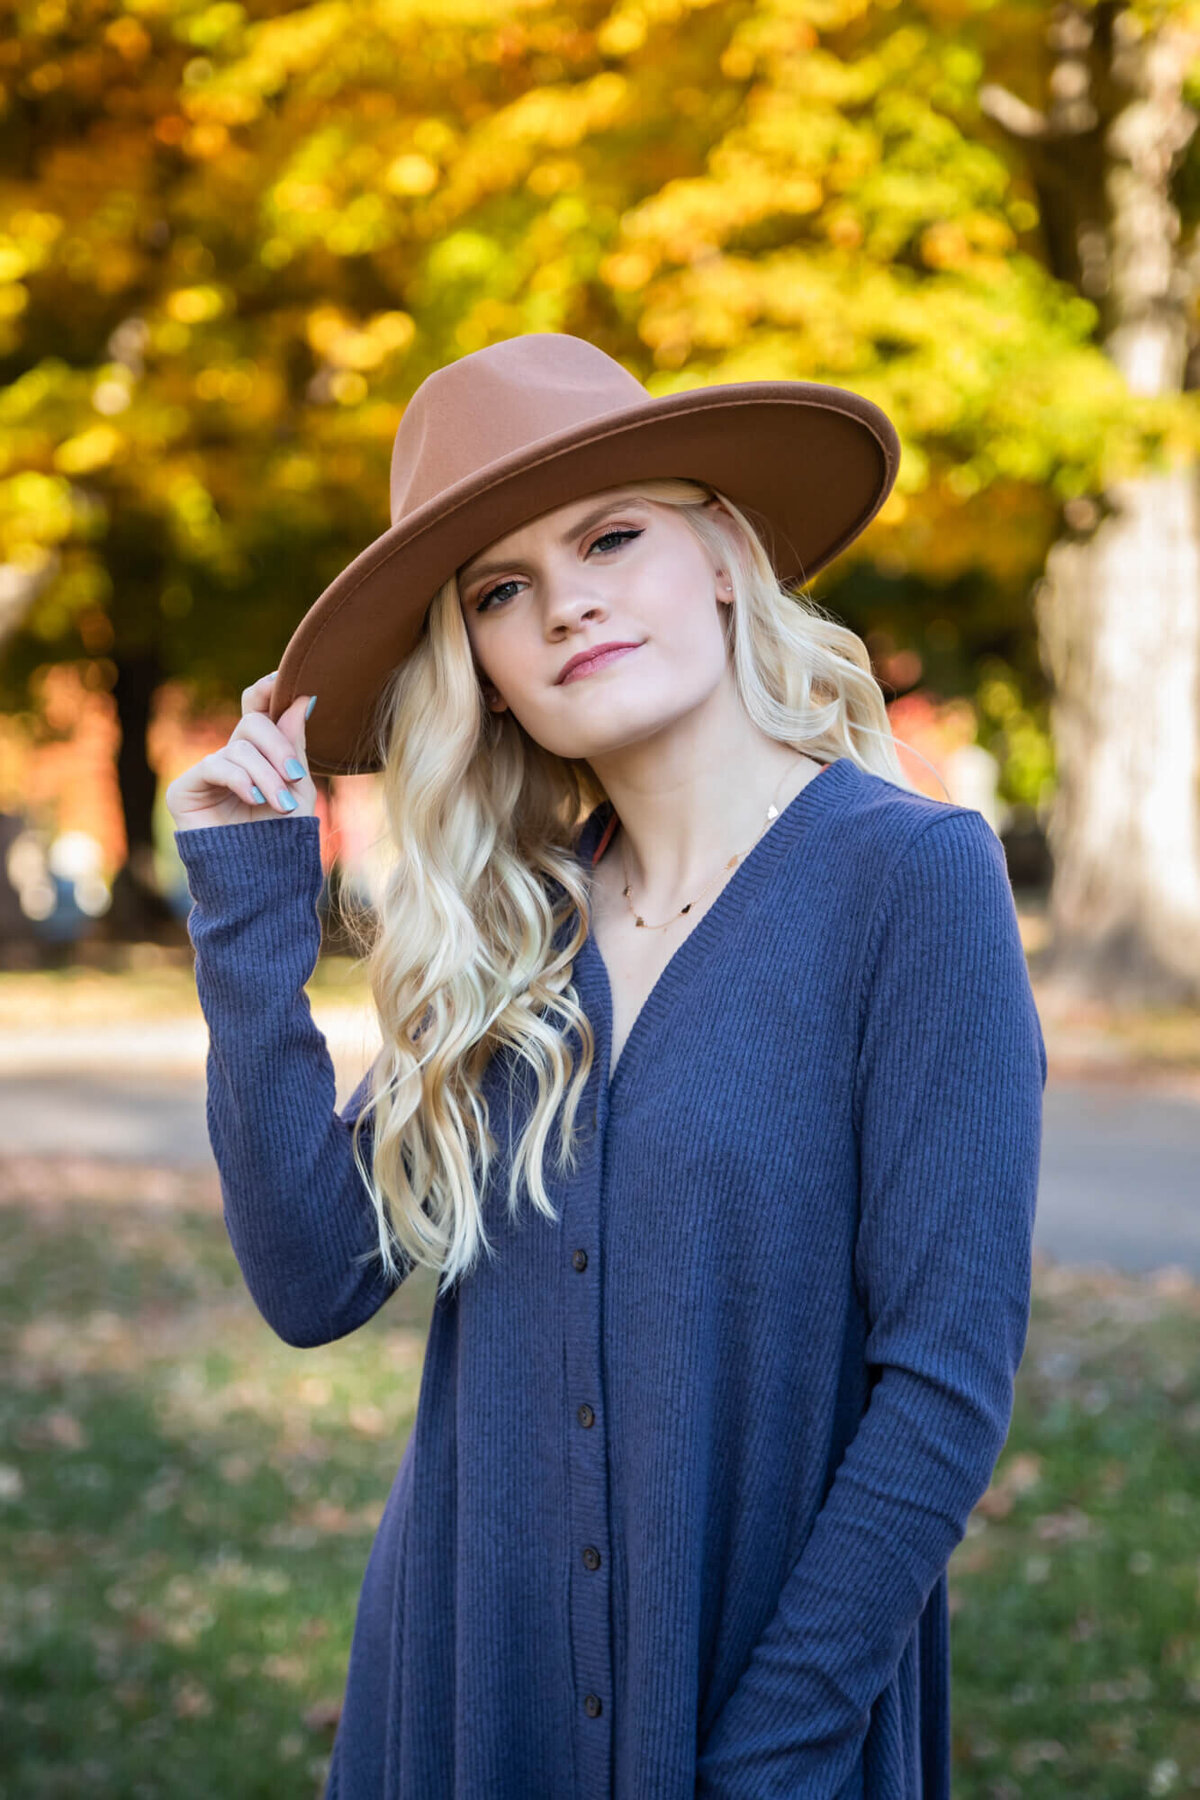 A lovely blonde teen posing for a senior portrait wearing a blue dress and a wide brimmed brown hat surrounded by golden Fall leaves. Captured by Springfield, MO senior photographer Dynae Levingston.